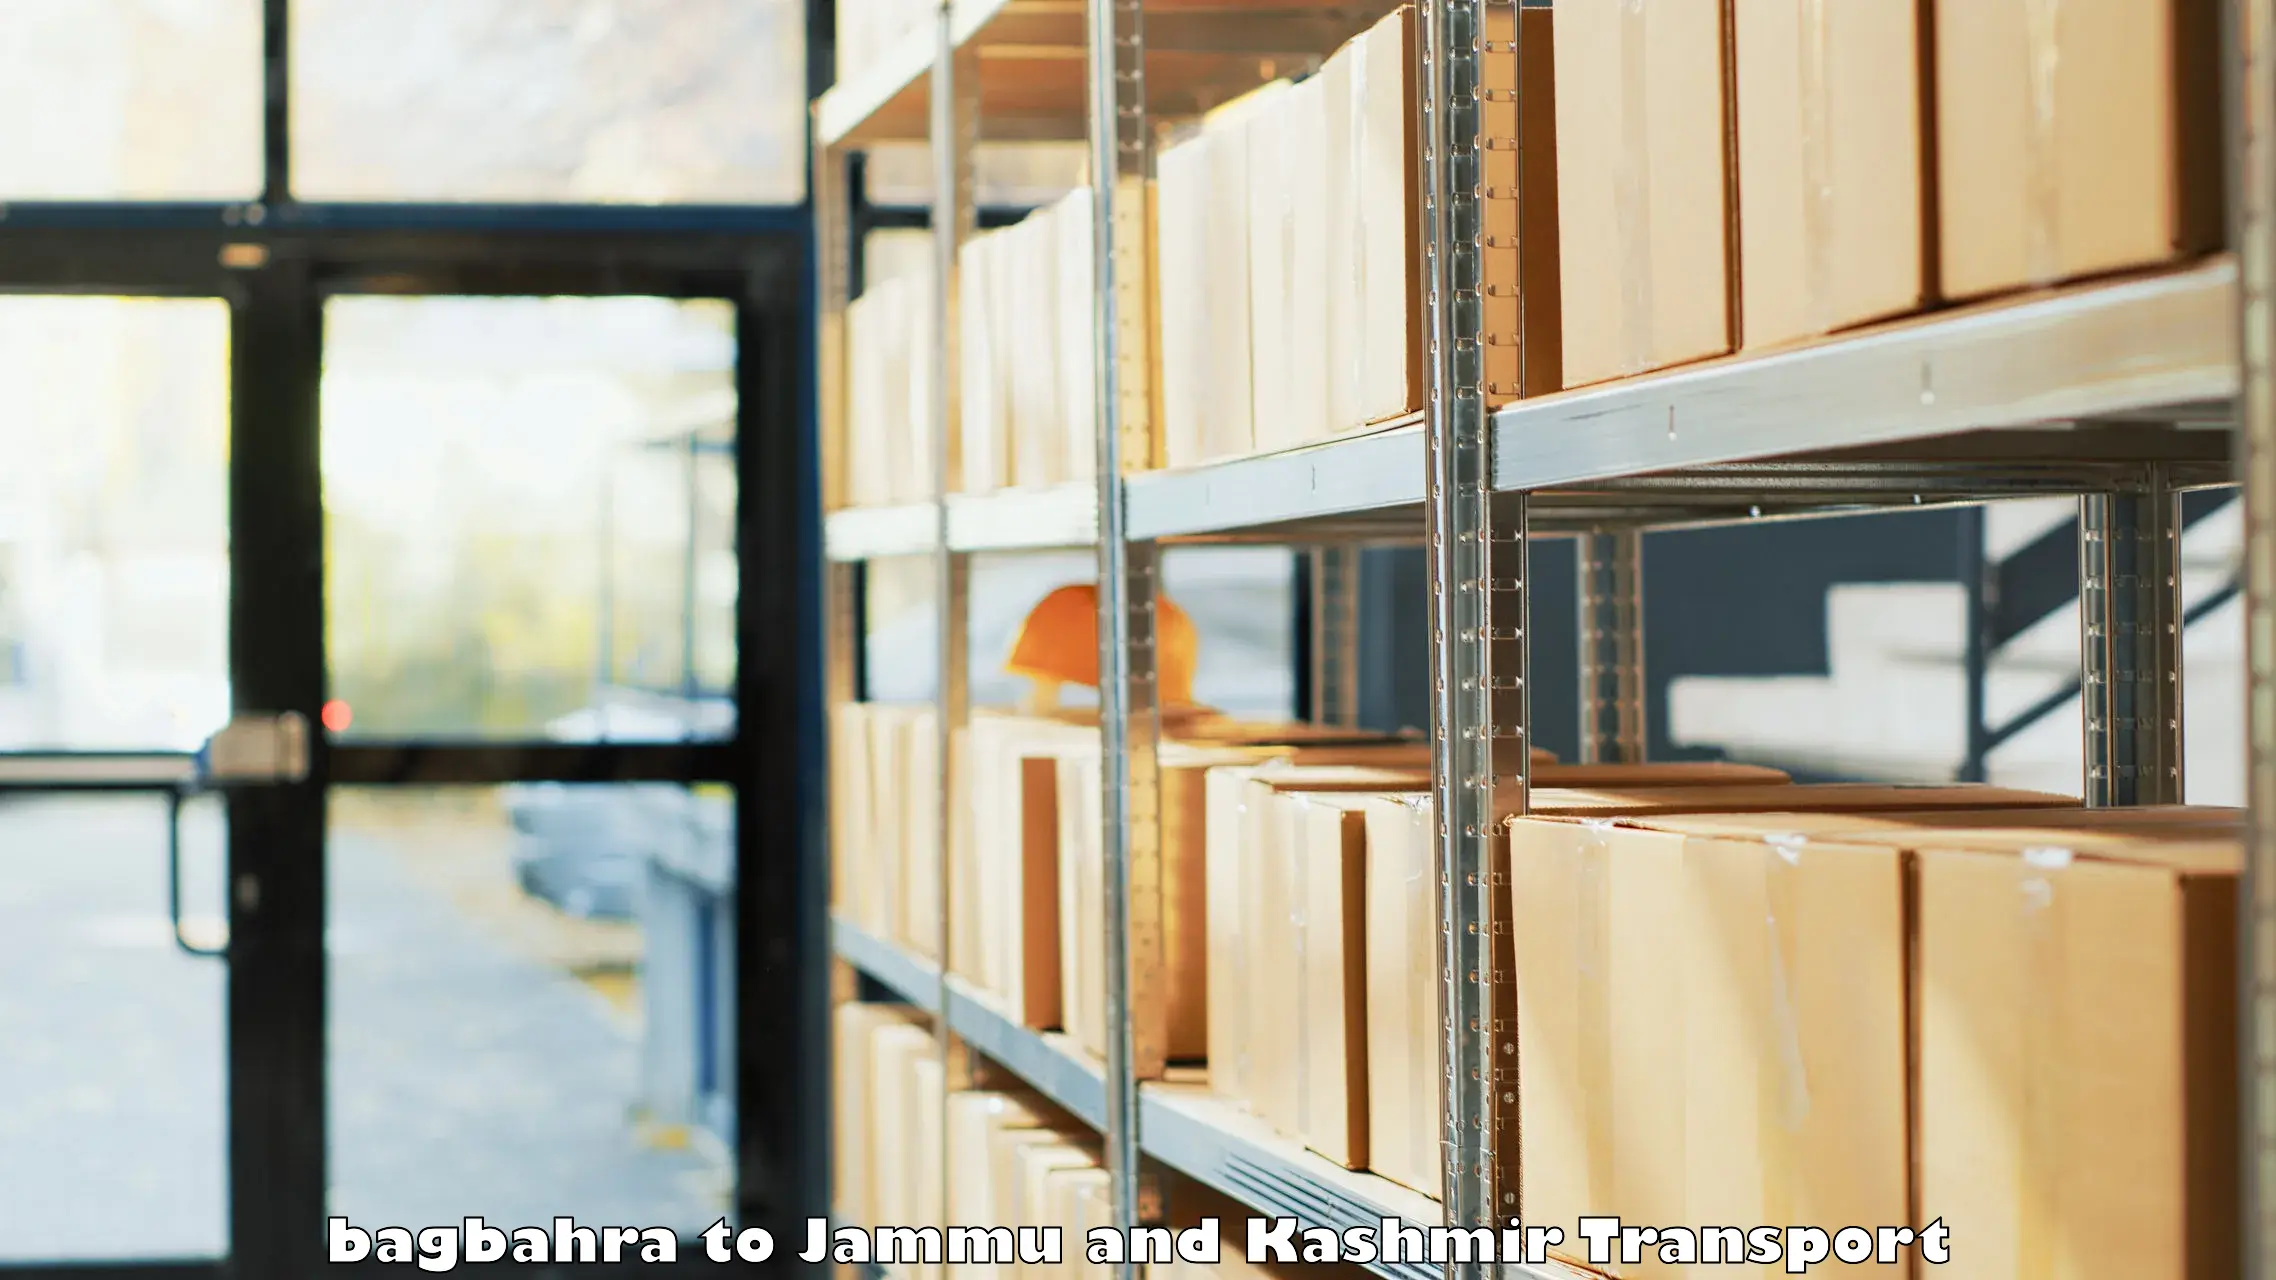 Parcel transport services in bagbahra to University of Jammu